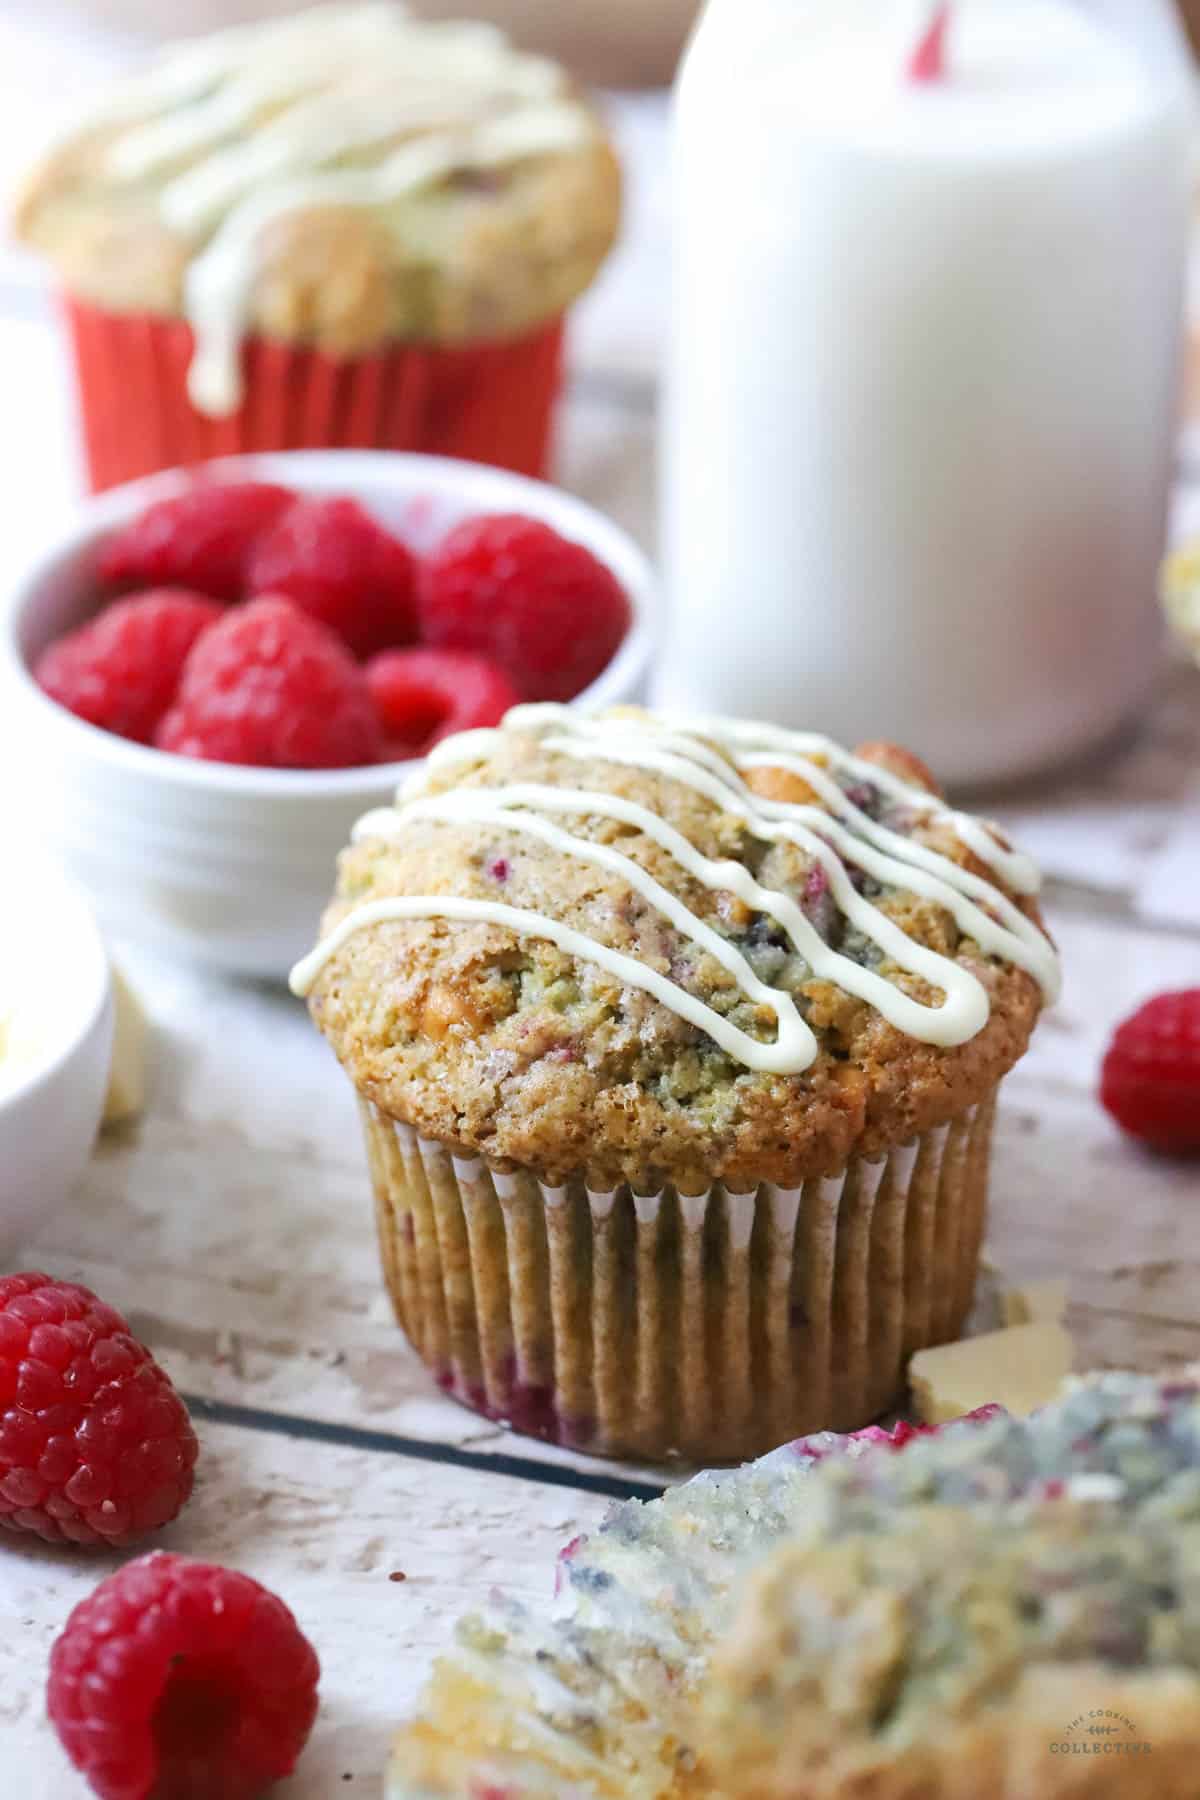 a finished muffin on a wooden table with white chocolate and a bowl of raspberries